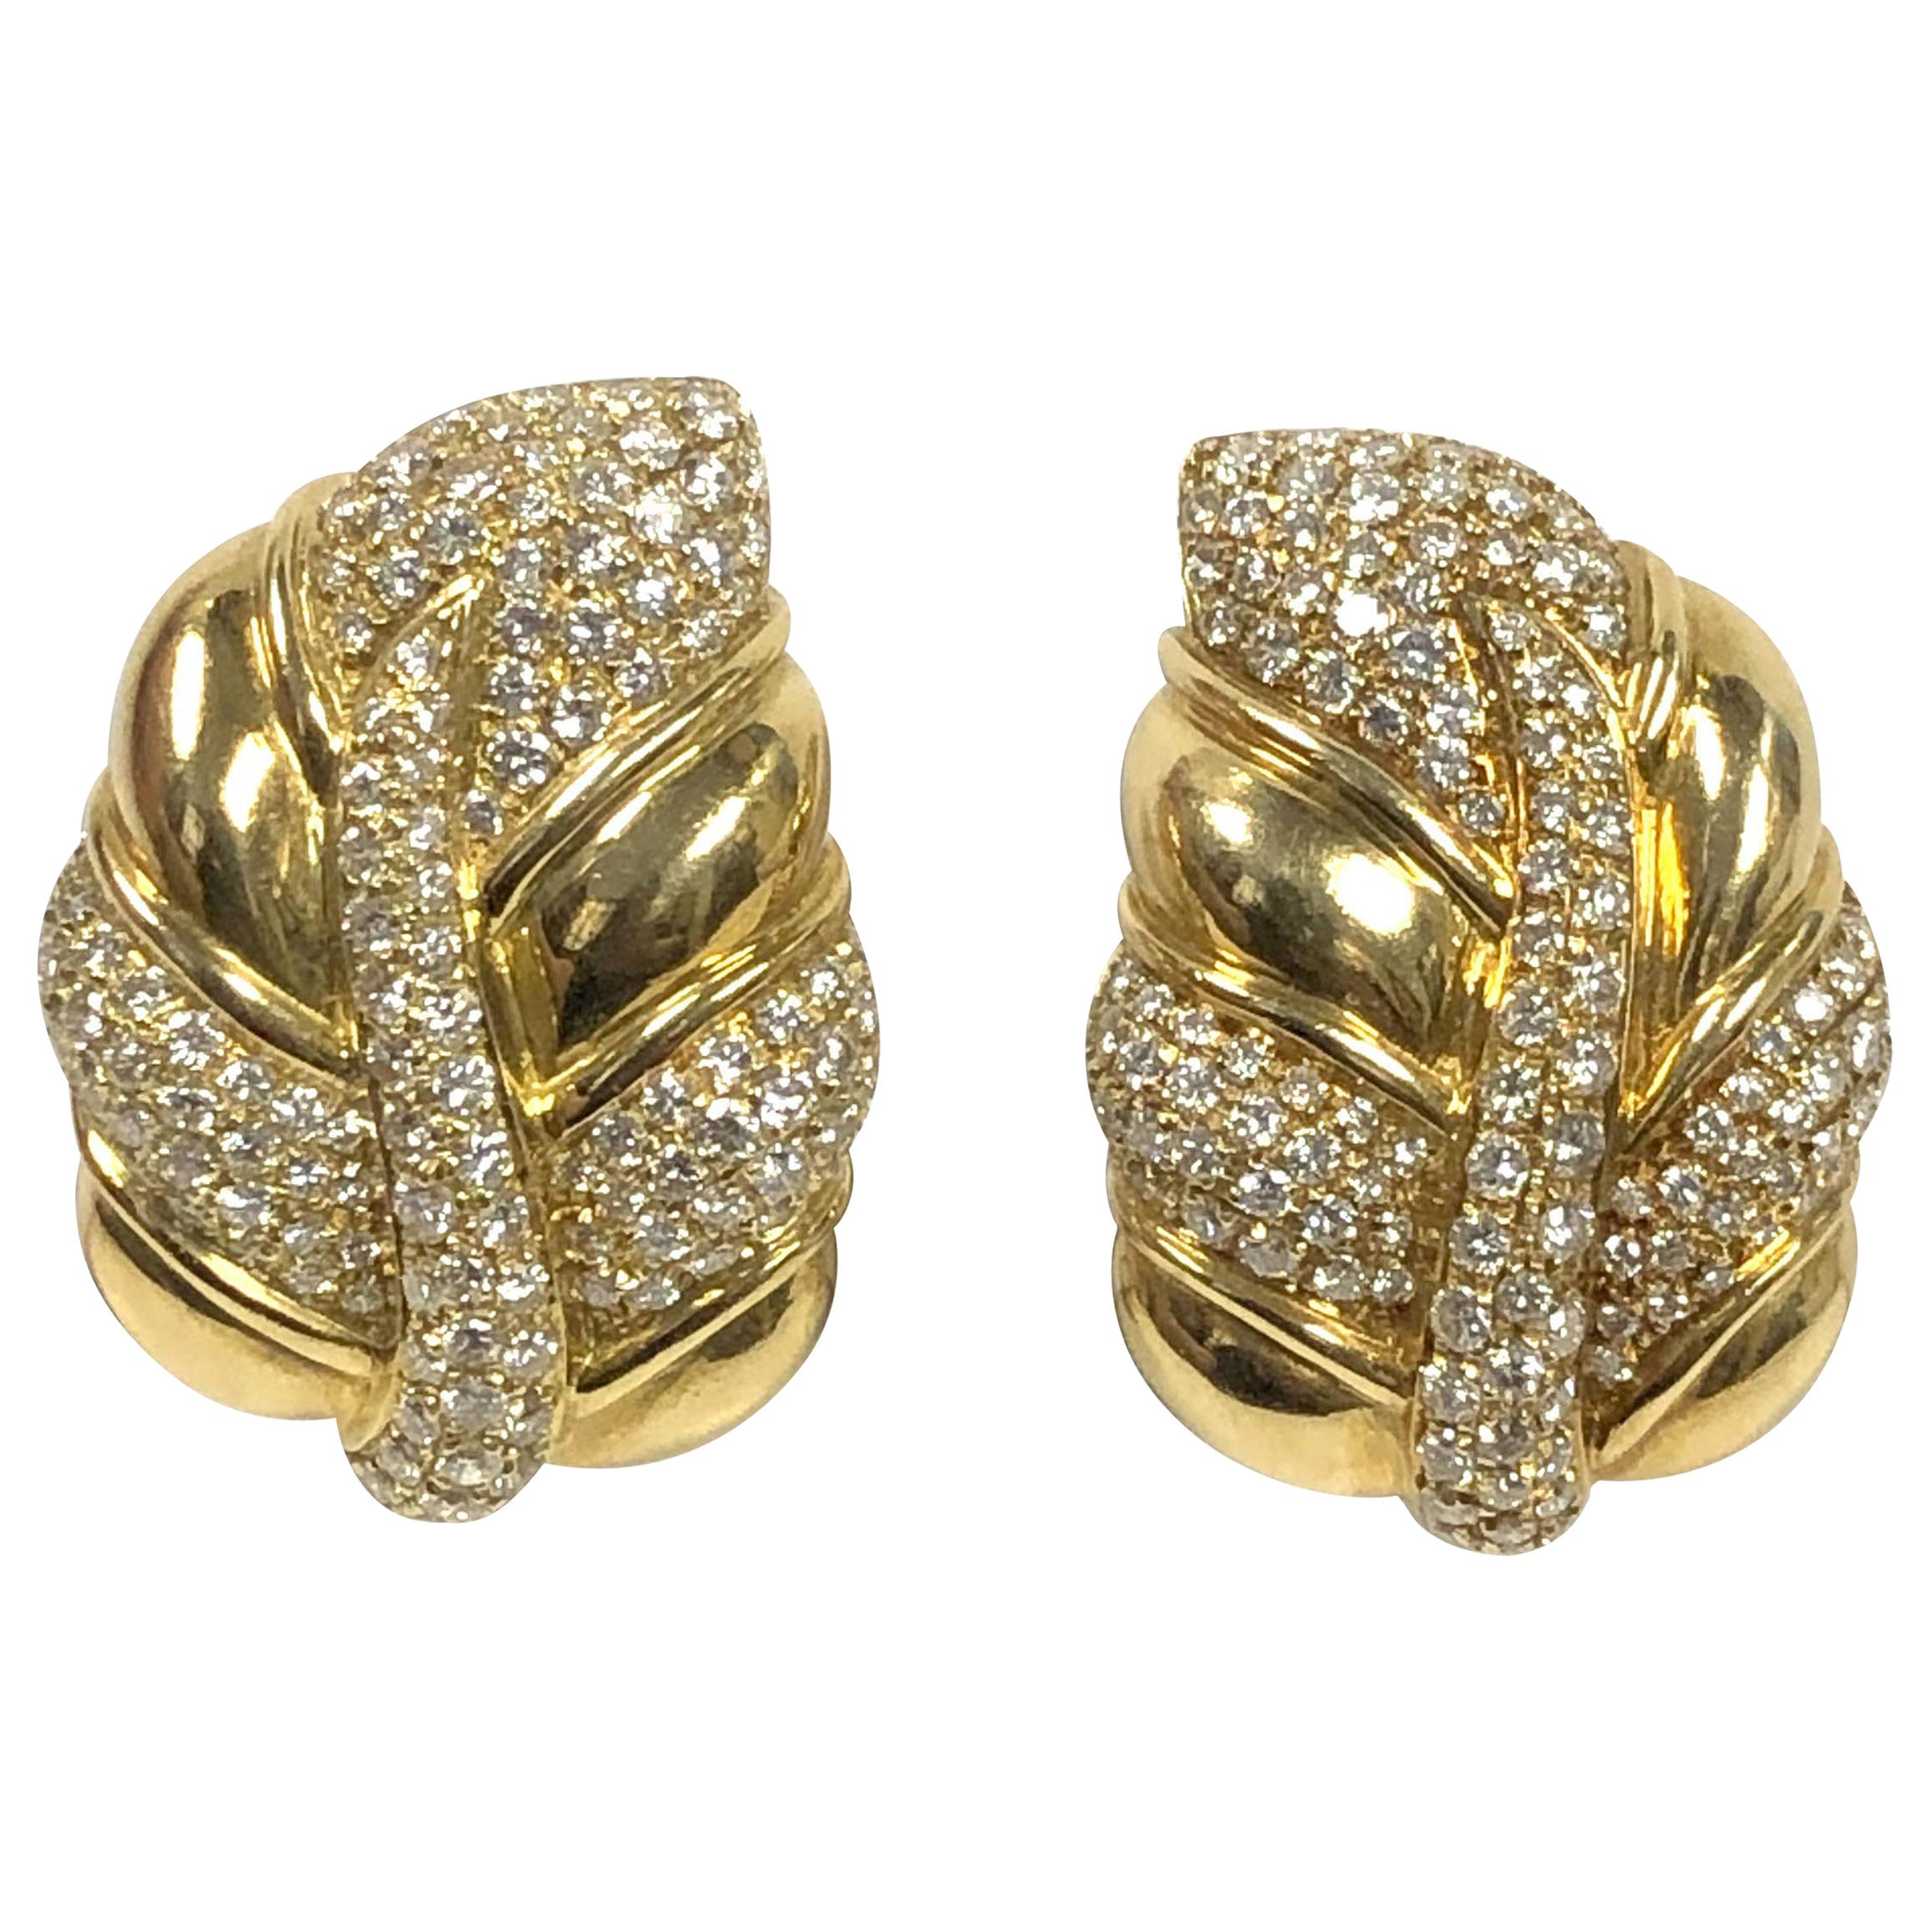 Diamond and Yellow Gold Large Impressive Leaf Form Earrings